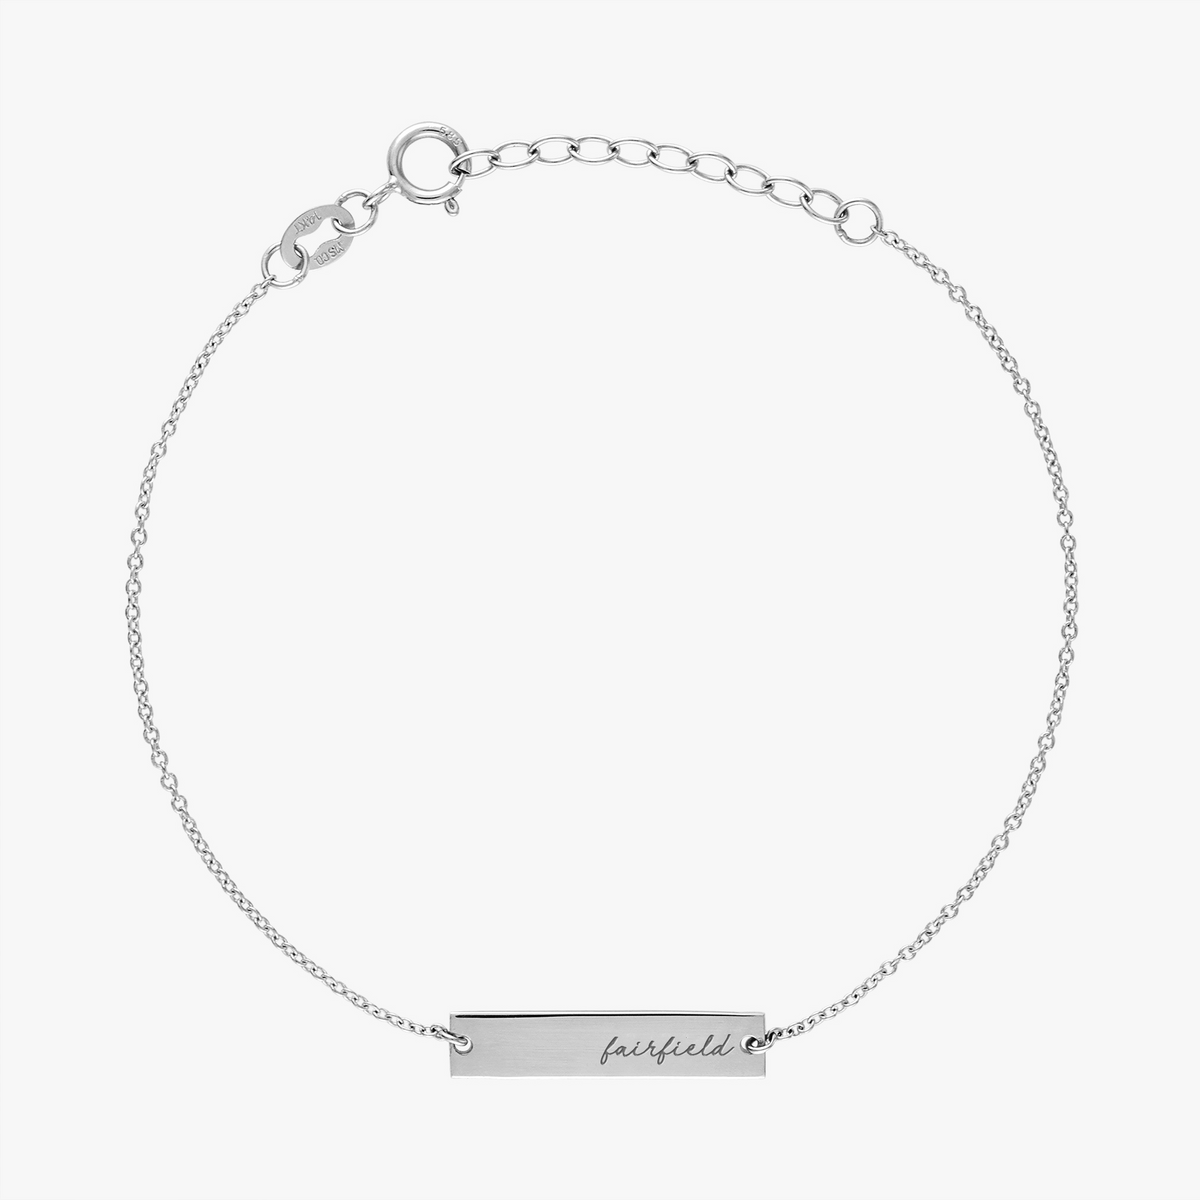 Fairfield University Horizontal Necklace Sterling Silver